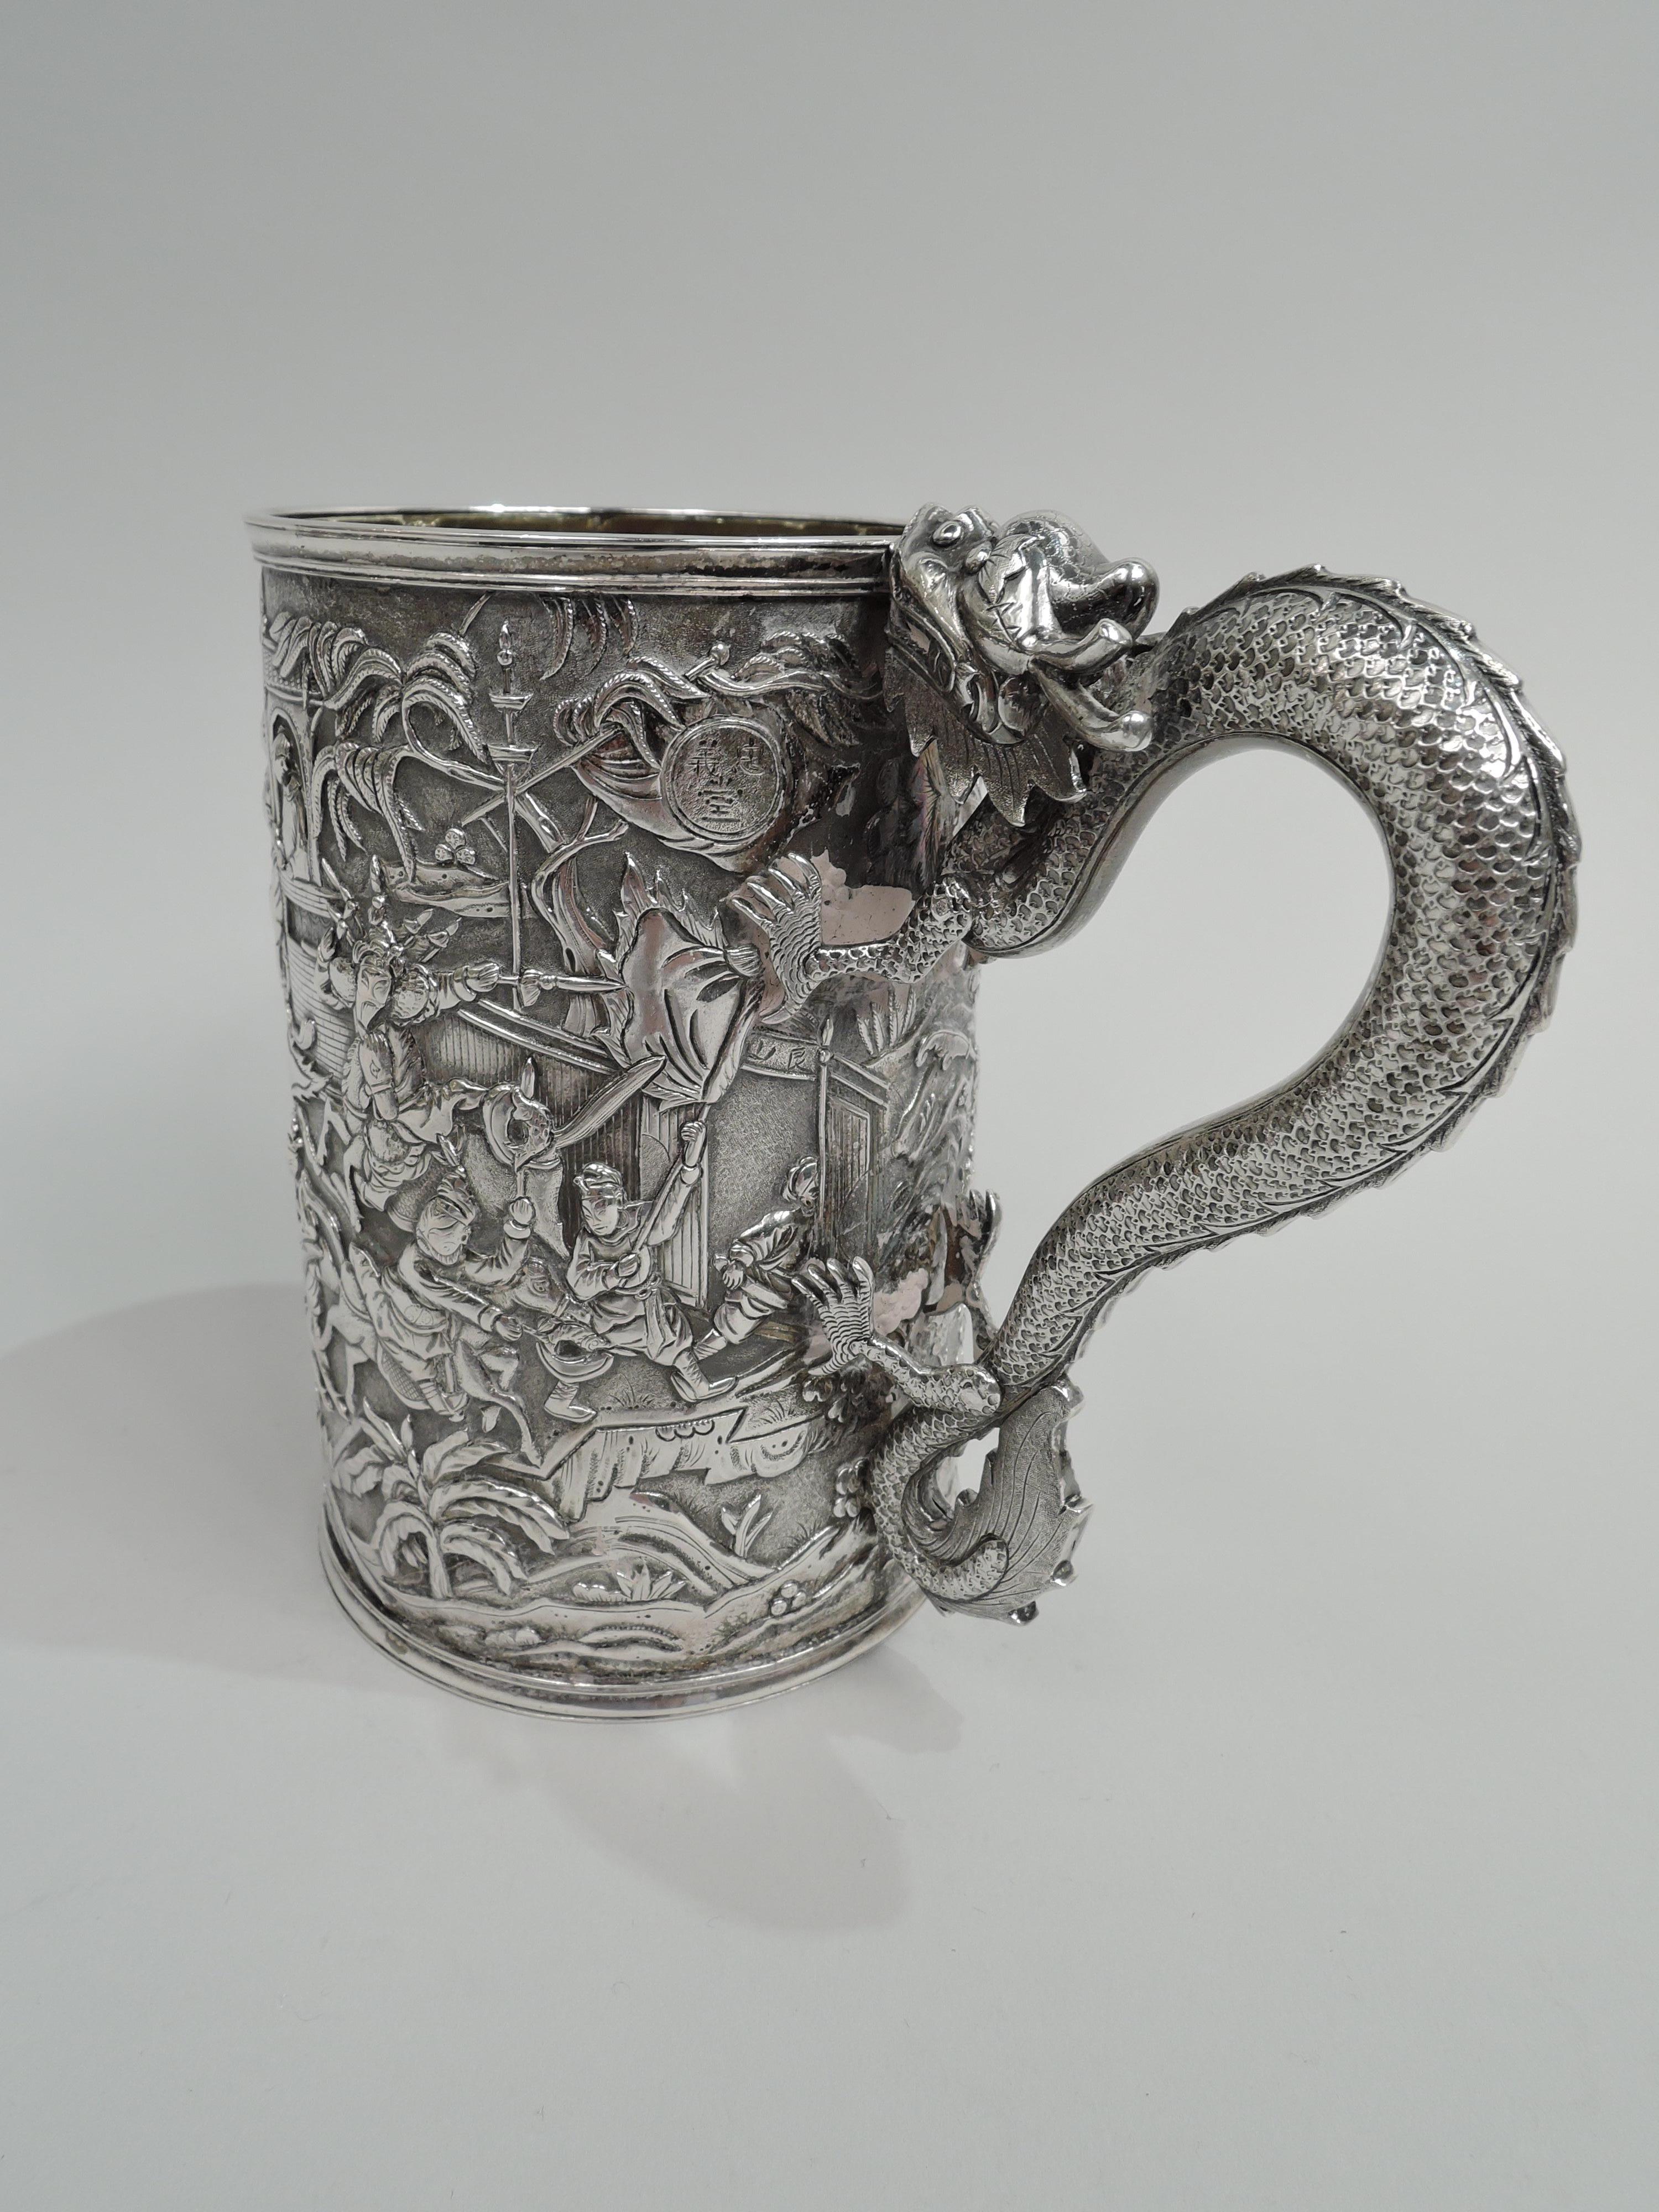 Large Chinese silver mug, late 19th century. Straight and upward tapering sides with dense low-relief frieze on stippled ground: A battle with spearmen, flag bearers, swordsmen, and lancers. An open gate indicates the direction of the fighting.